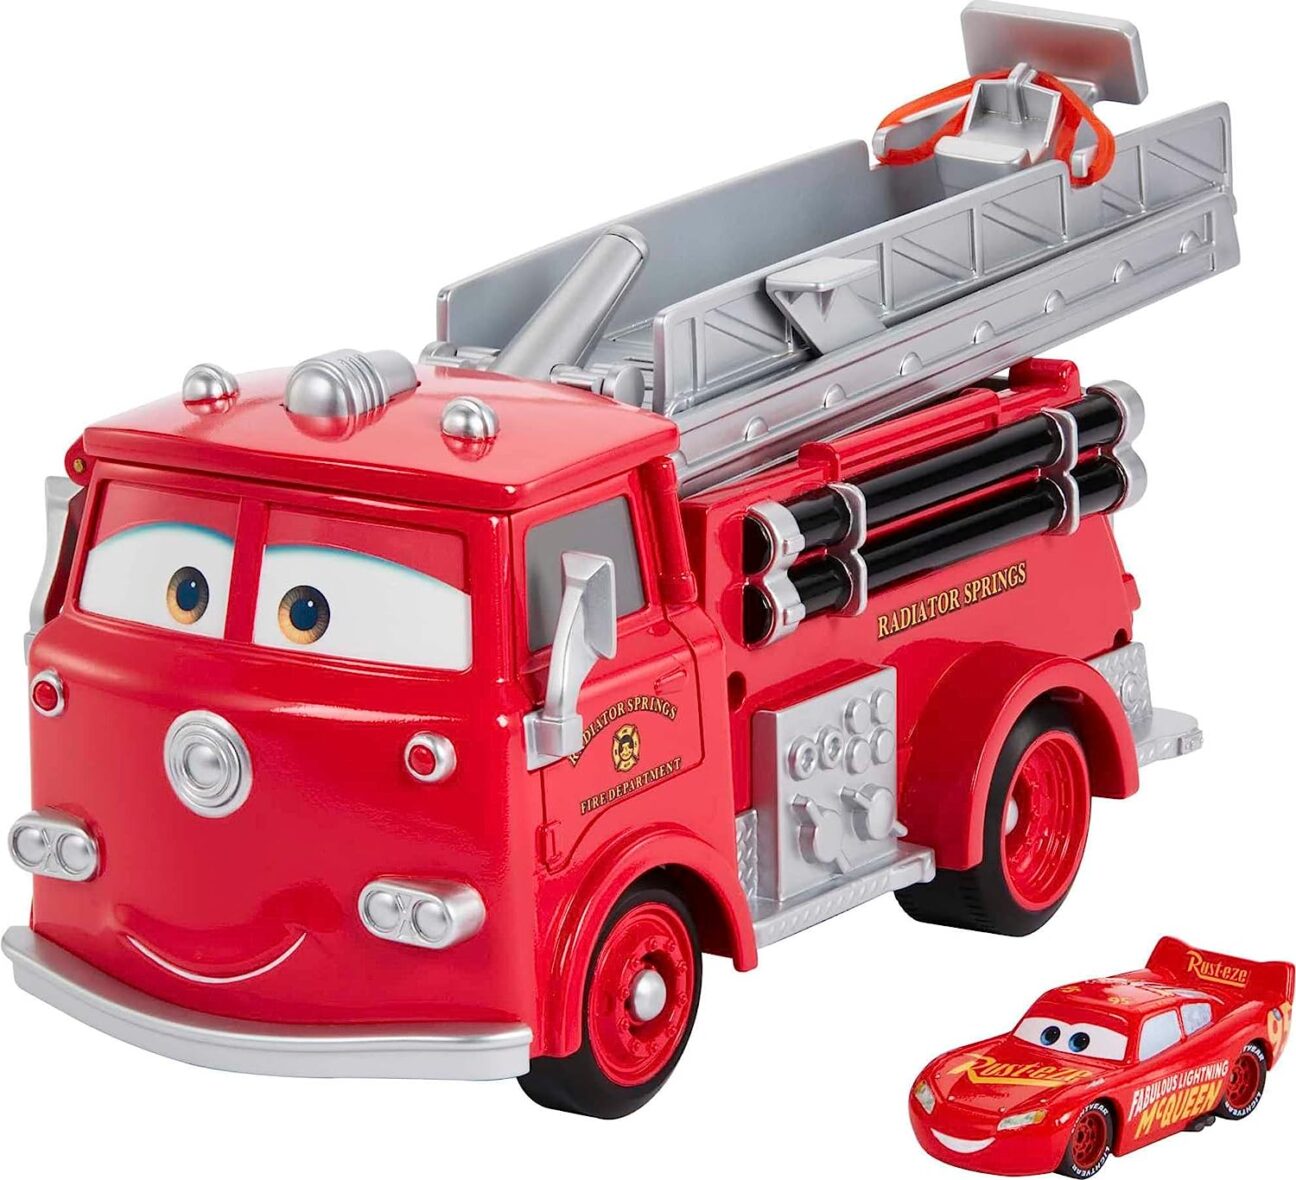 Mattel Disney Pixar Cars Stunt and Splash Red with Exclusive Color Change Lightning McQueen Vehicle, Color Changers Playset For Transforming Paint Job Vehicles, Kids Birthday For Kids Age 4 and Older